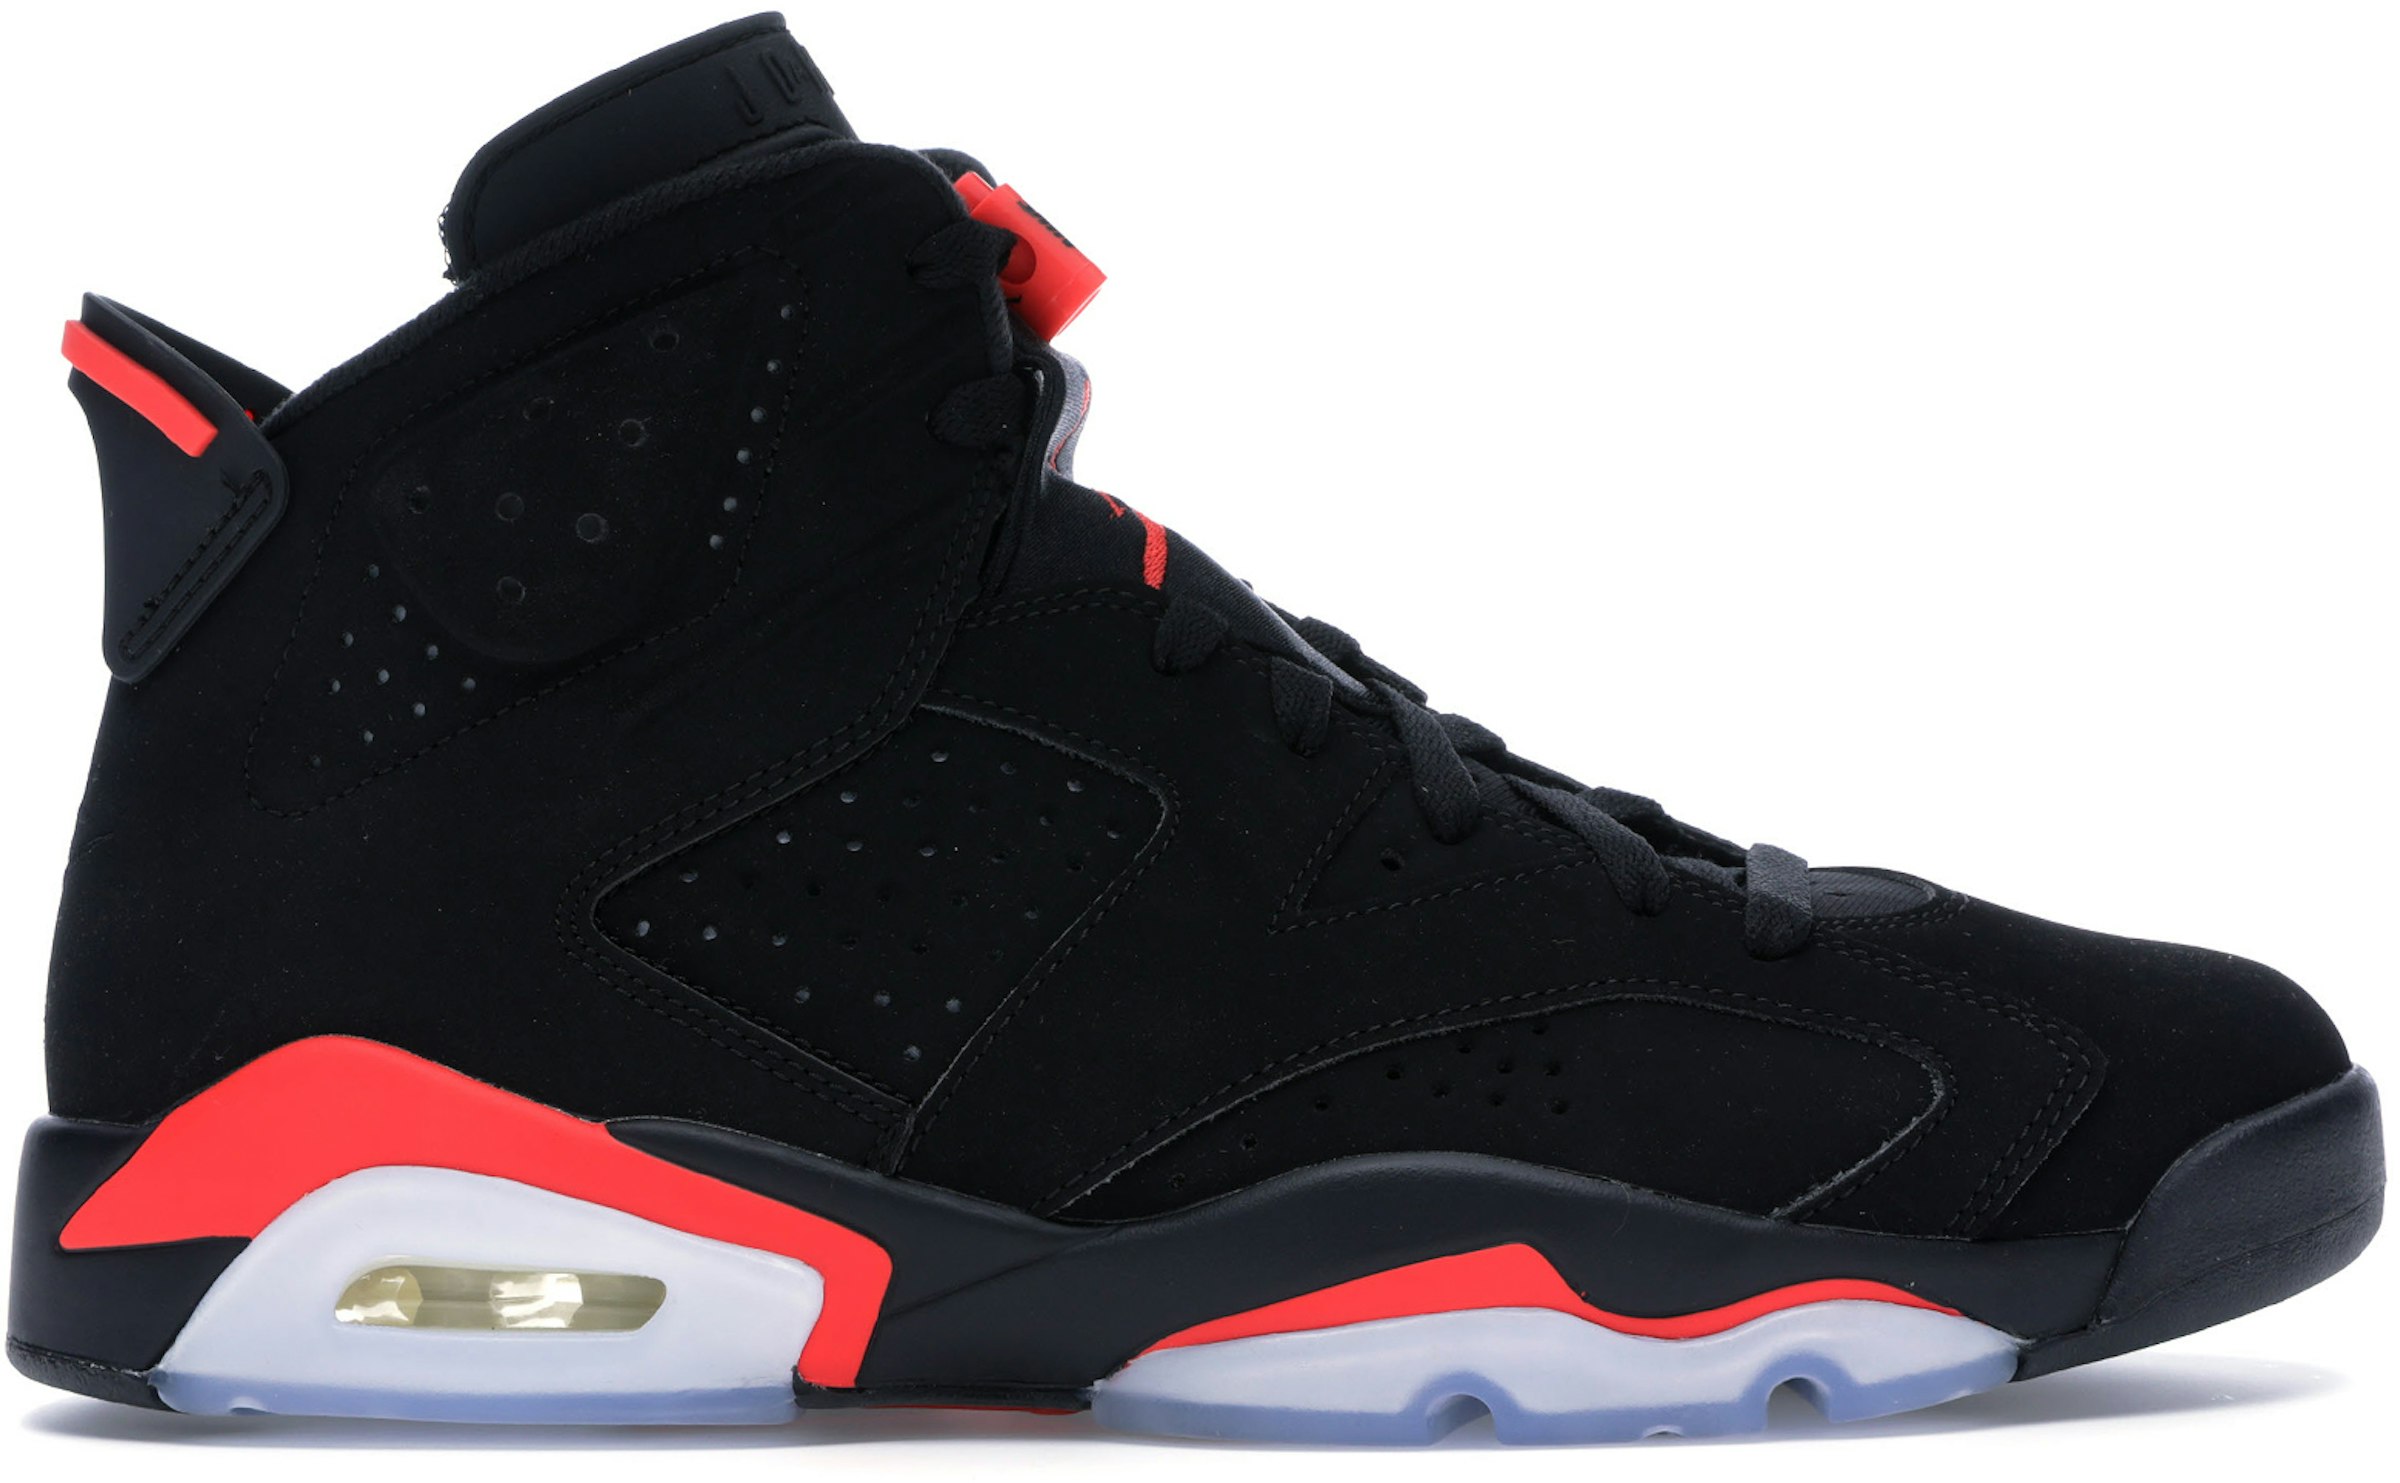 Retro Black Infrared (2019) - 384664-060 from $272